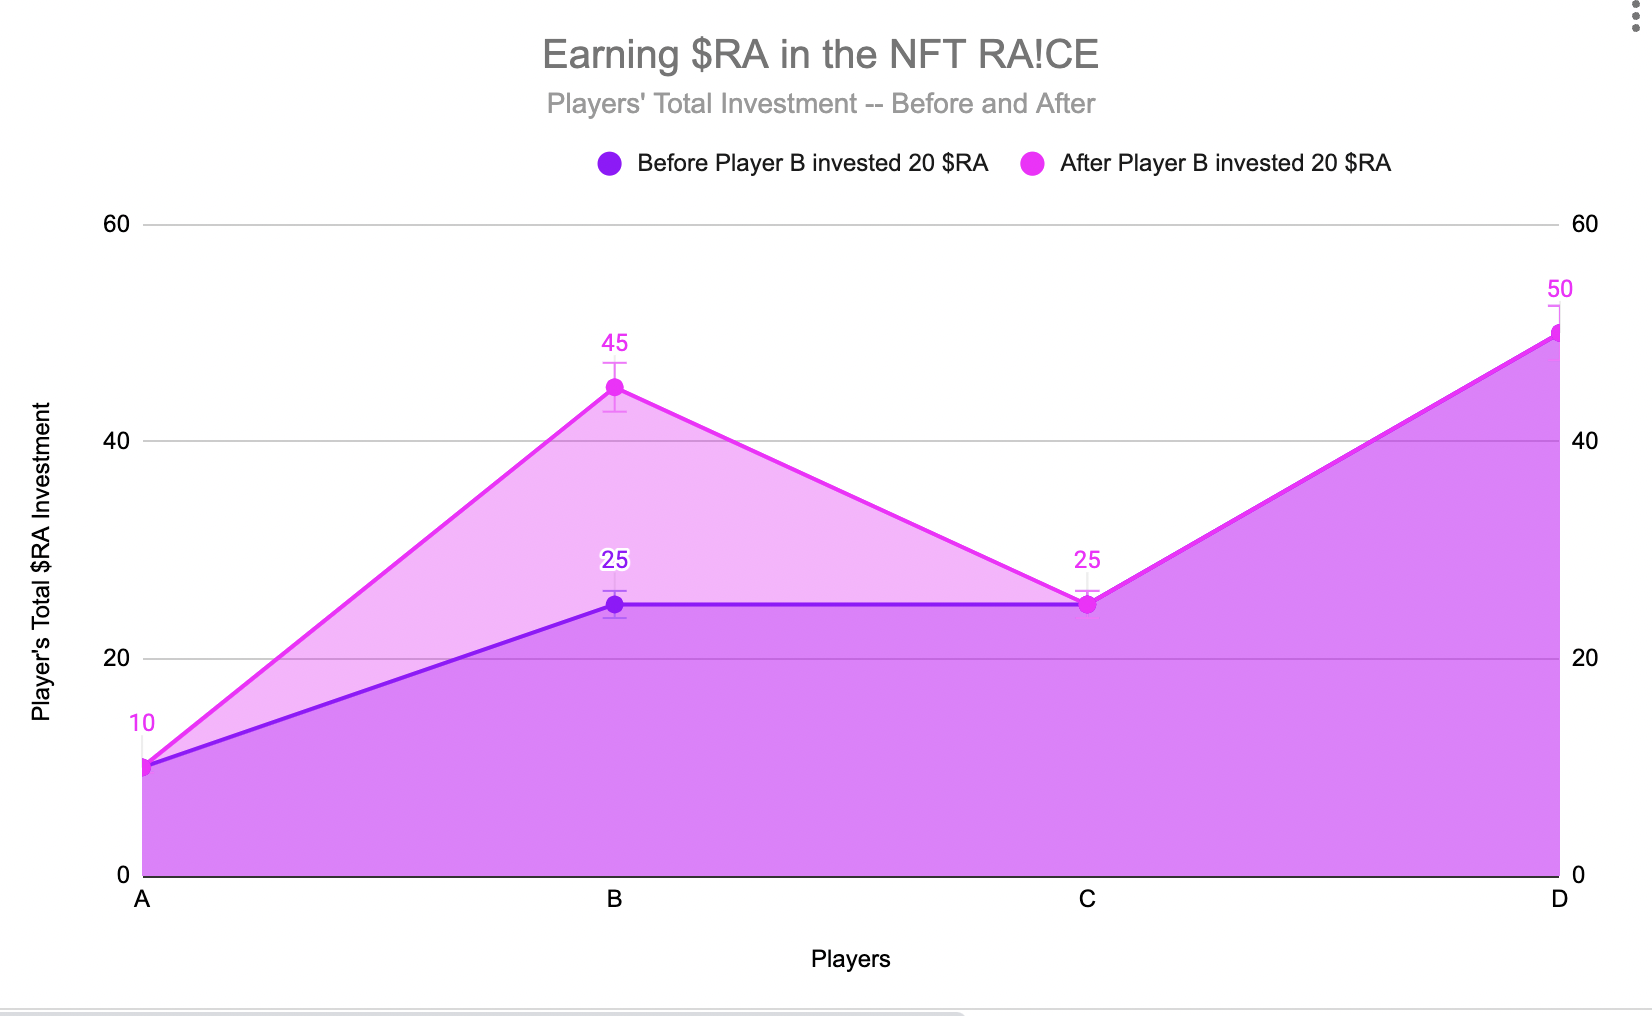 Note: The purple shows all the investments prior to Player B investing an additional 20 $RA! for a total of $45 RA! shown in pink.